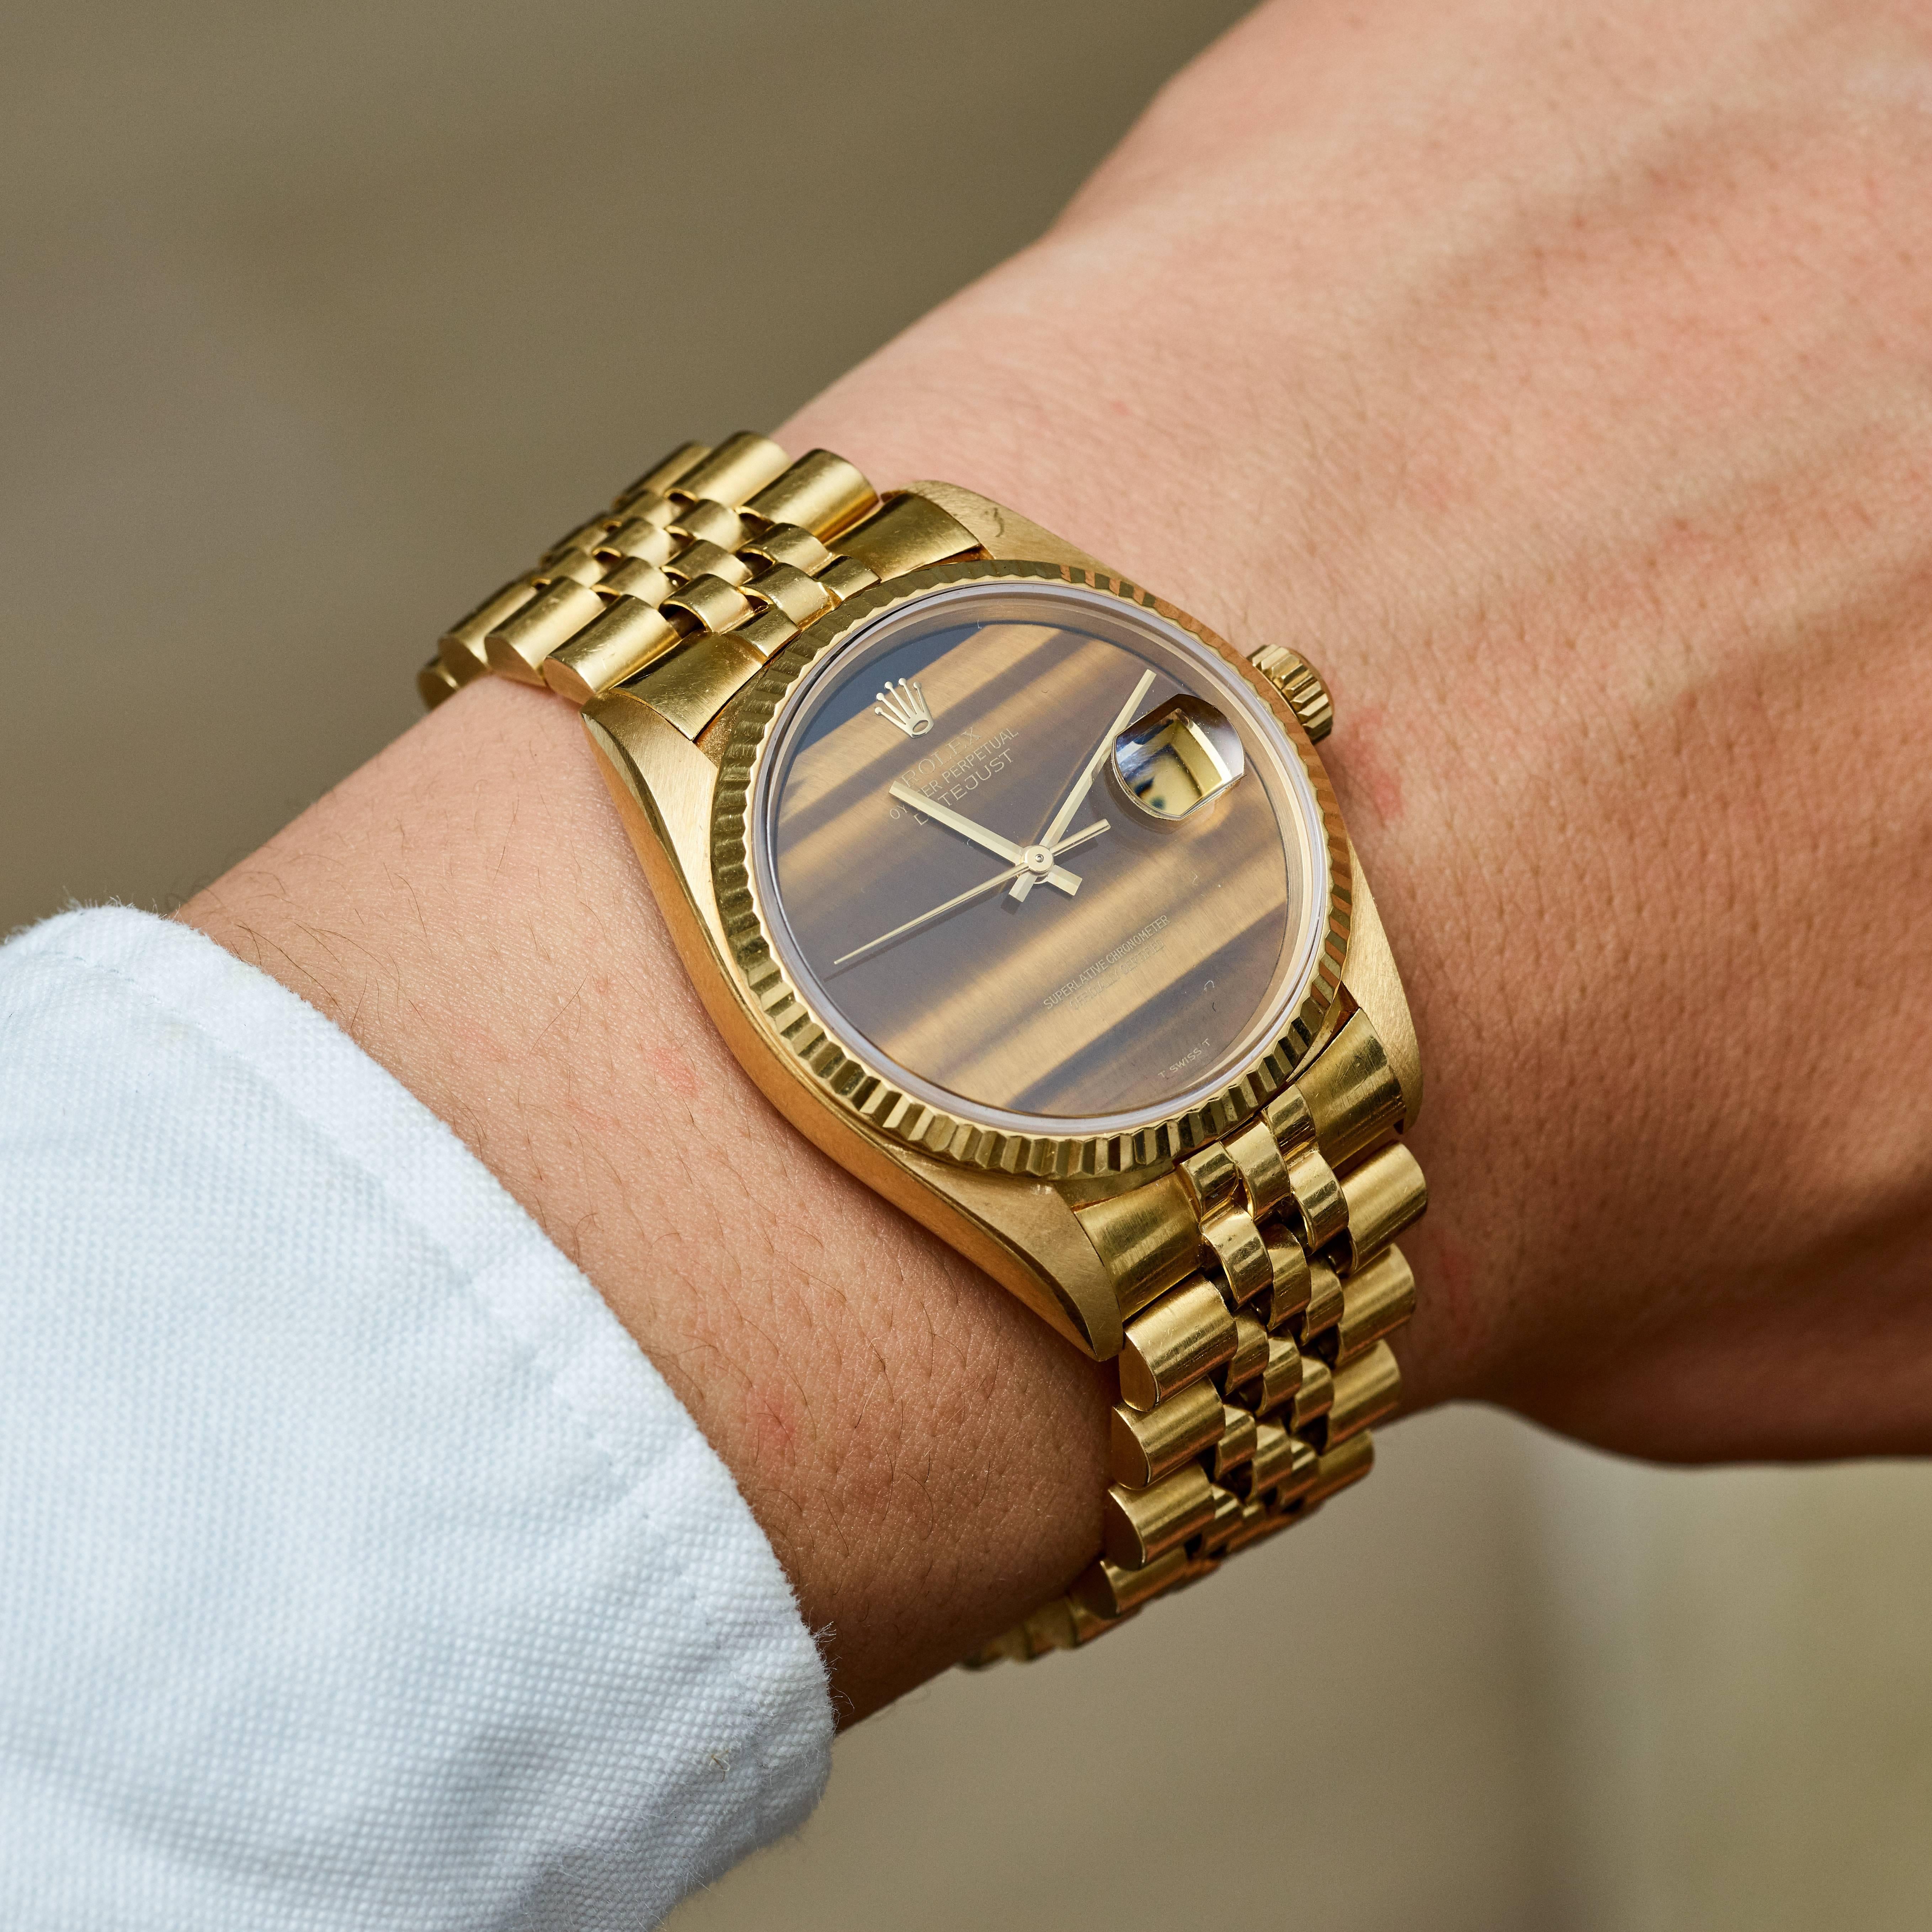 Rolex 18K Yellow Gold Oyster Perpetual Datejust Wristwatch
Factory Rolex Tiger's Eye Quartz Hard Stone Dial
Stunning Original Rolex Tiger's Eye Dial without Numerals 
Matching Hands to Dial 
18K Yellow Gold Fluted Bezel
36mm in size 
Rolex Calibre